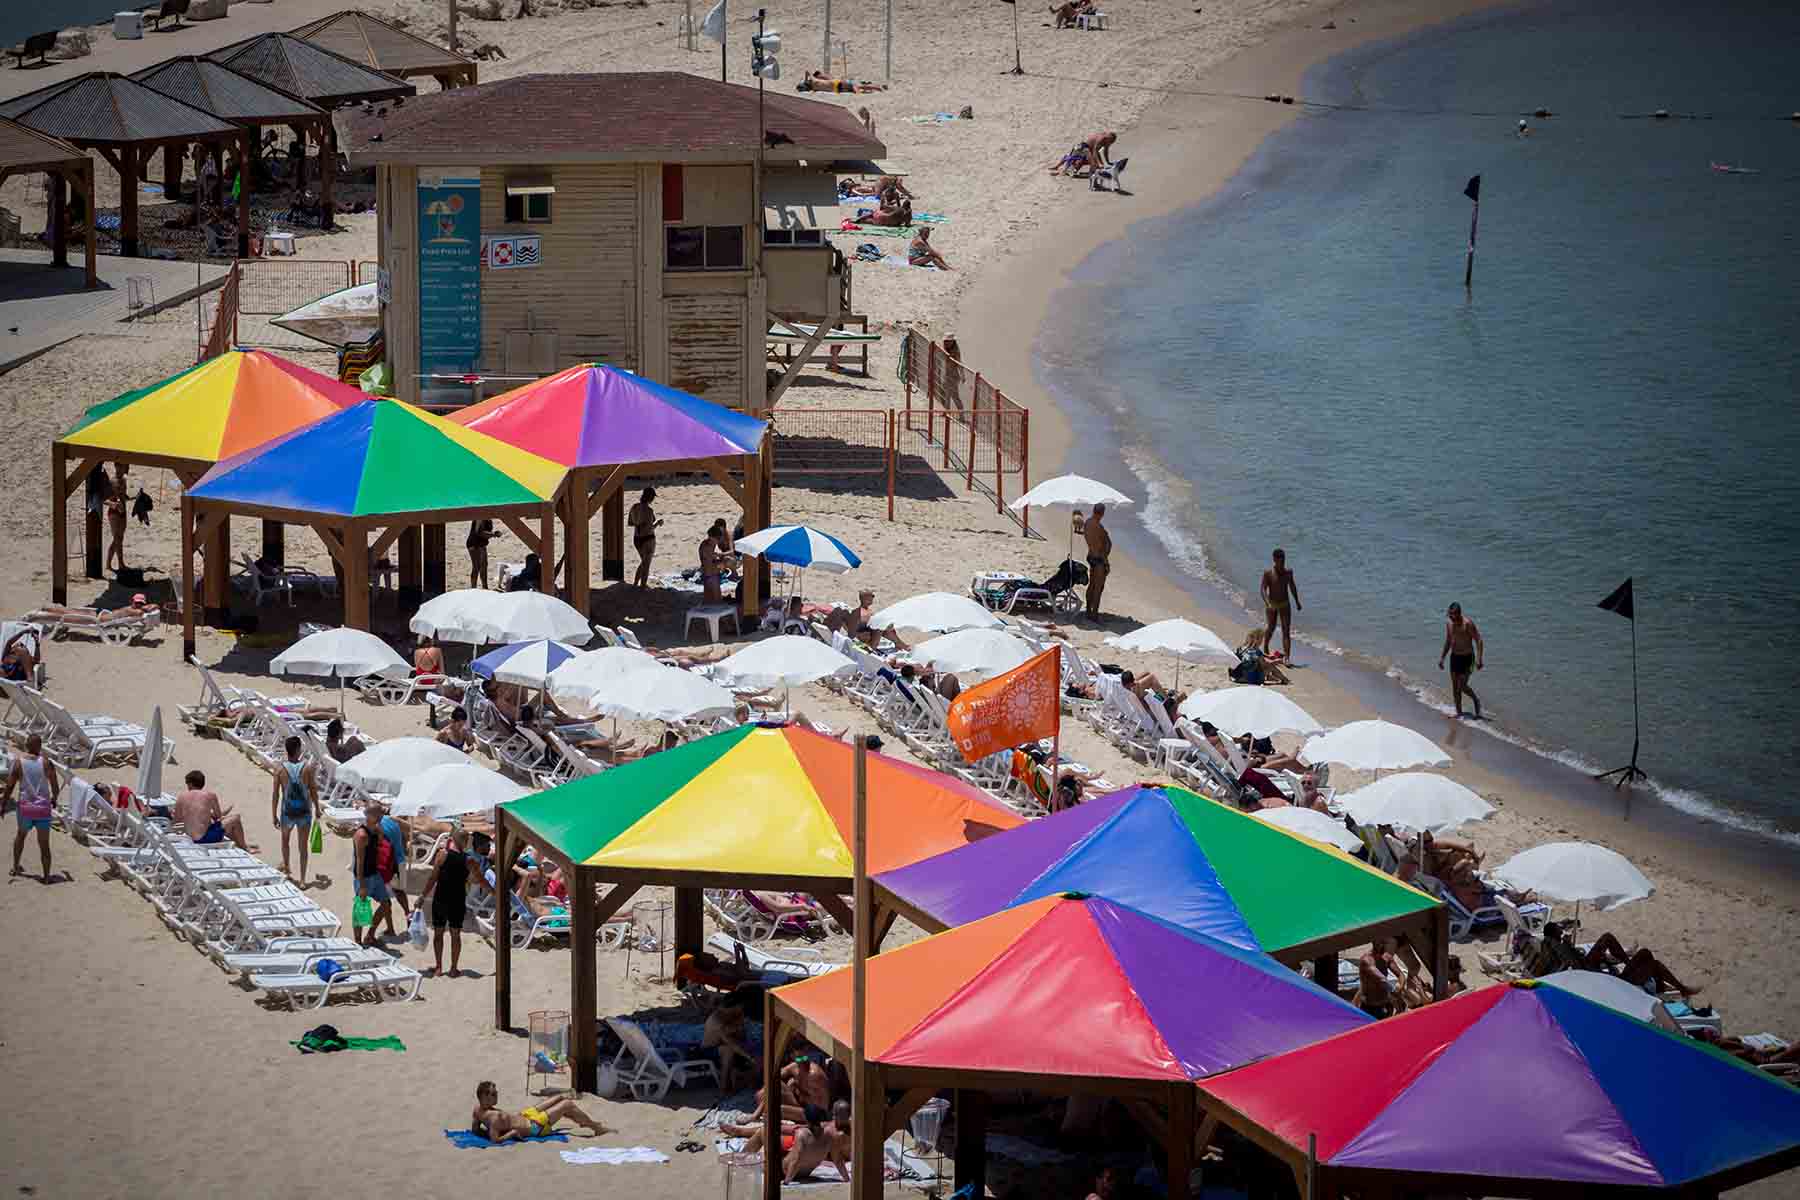 The Tel Aviv beachfront shows support for the Pride Parade. (Photo: Miriam Elster / Flash90)